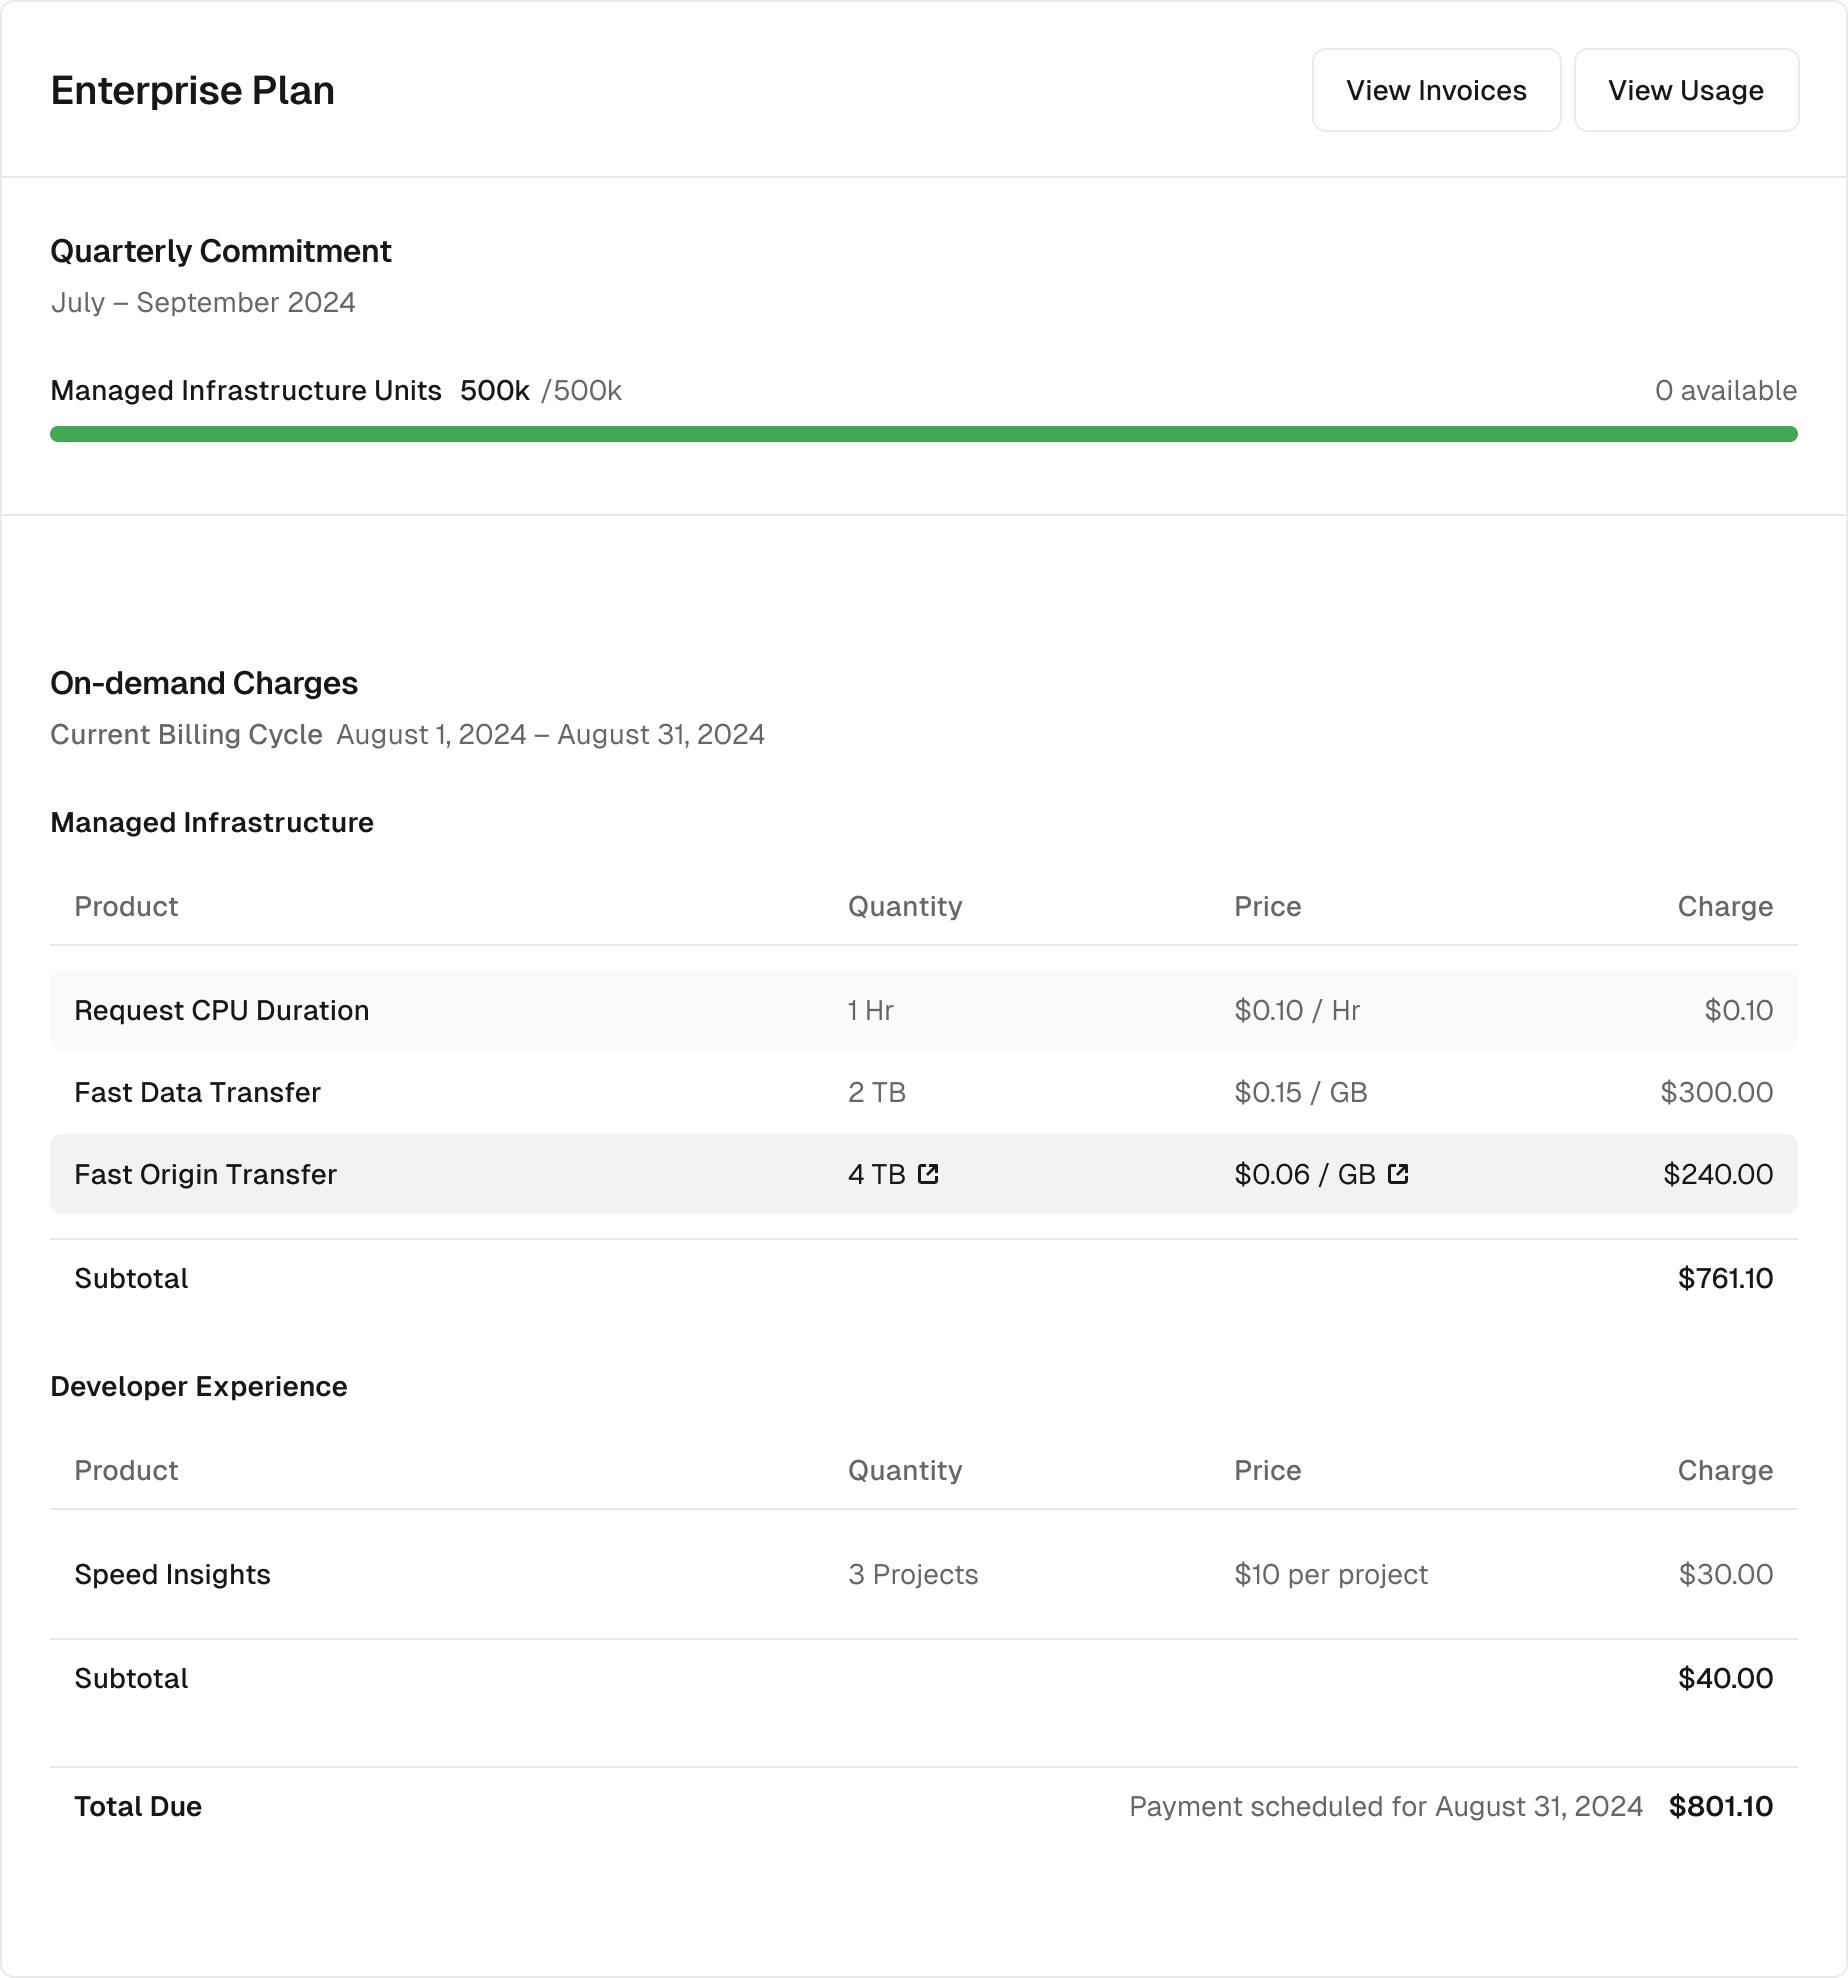 Enterprise plan invoice with Managed Infrastructure Units commitment and on-demand charges